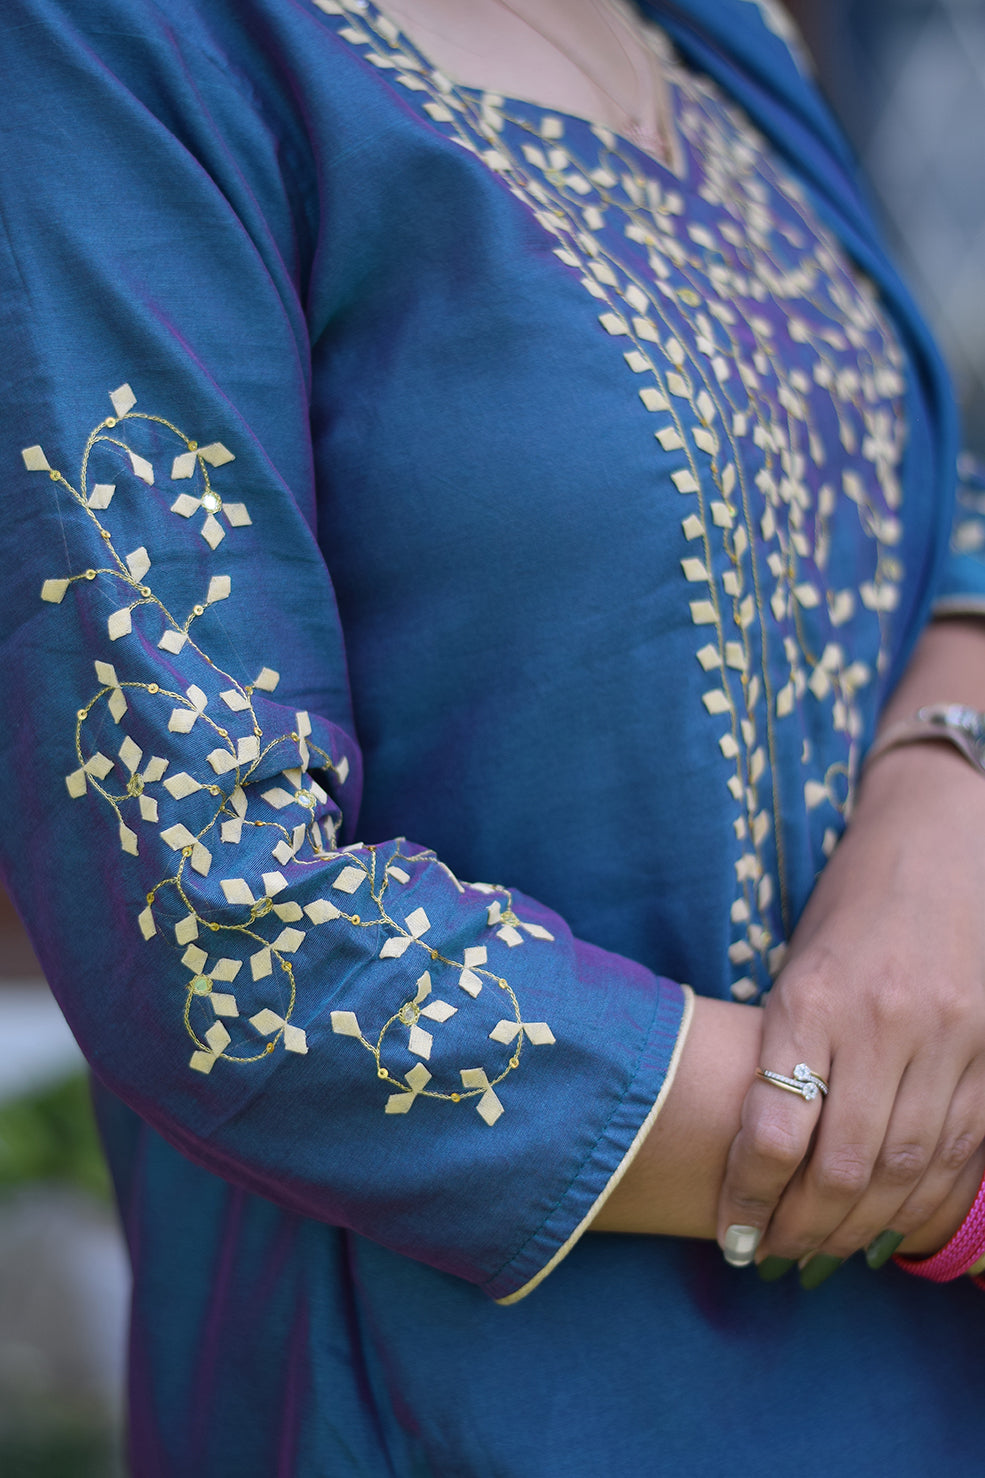 An Indian lady posing in a blue suit embellished with intricate applique work.